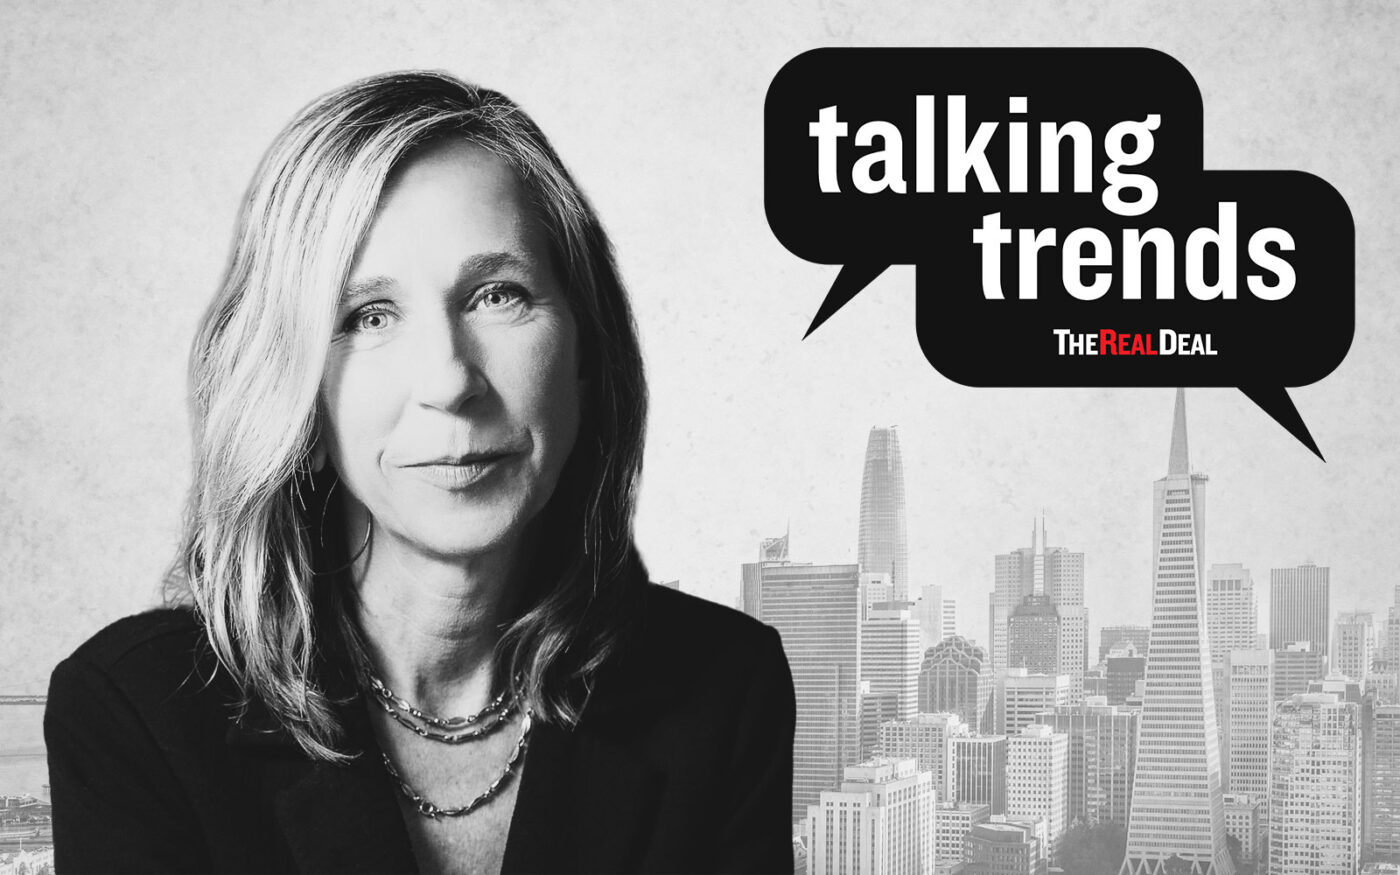 Talking Trends: OEWD’s Sarah Dennis Phillips on San Francisco’s downtown business recovery